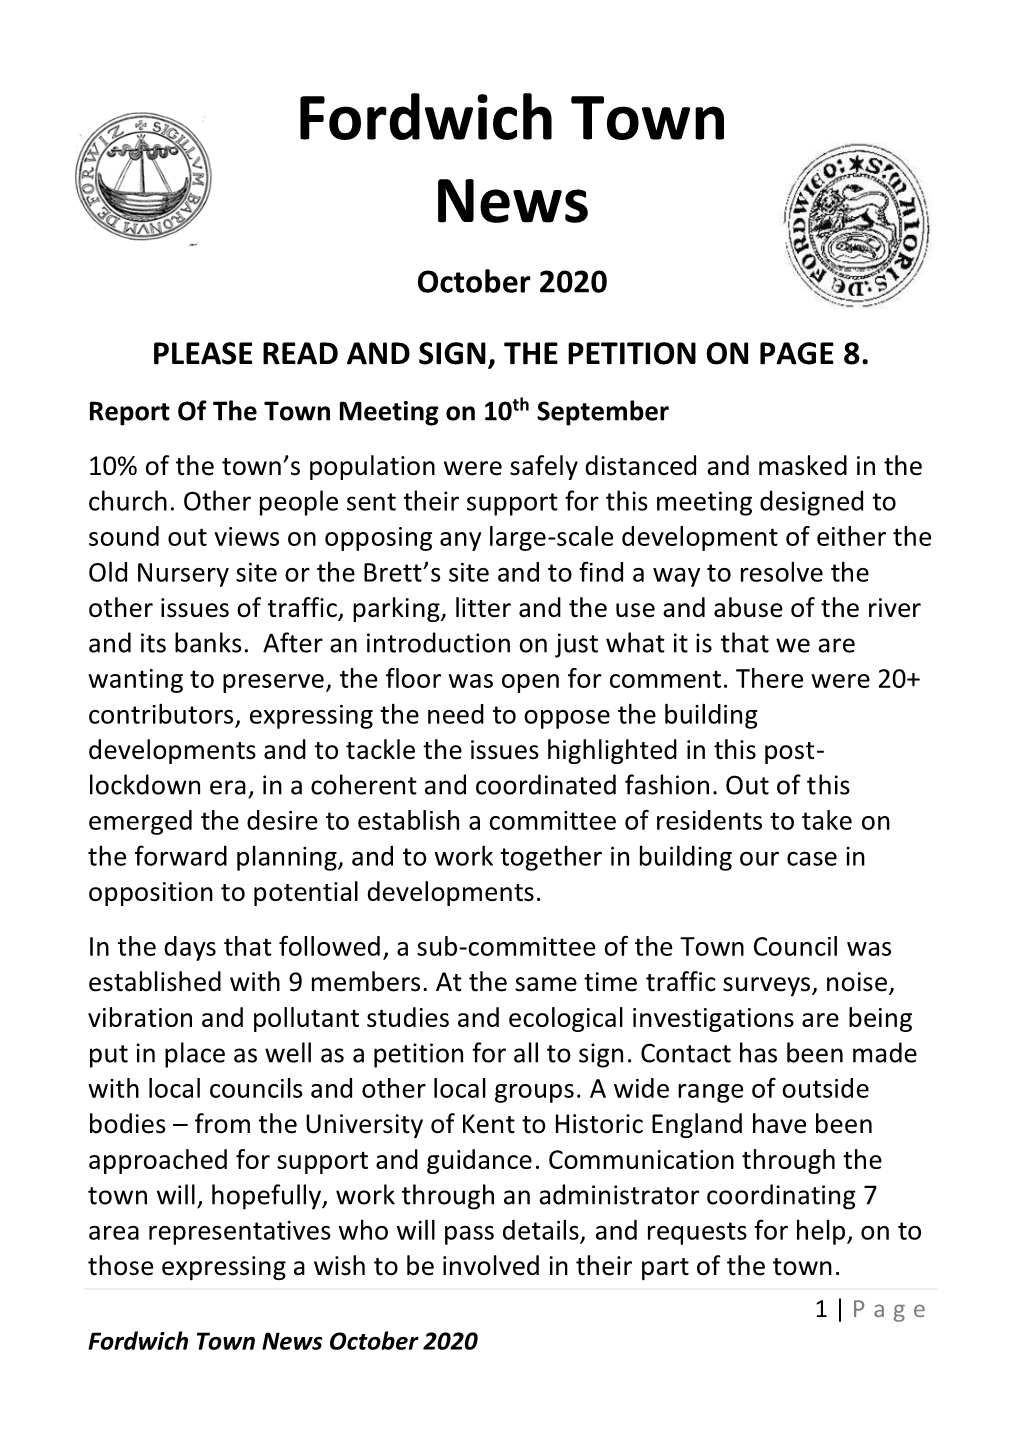 Fordwich Town News October 2020 Details of the Work of the Sub-Committee Will Be Reported Along with the Usual Town Council Report Month by Month